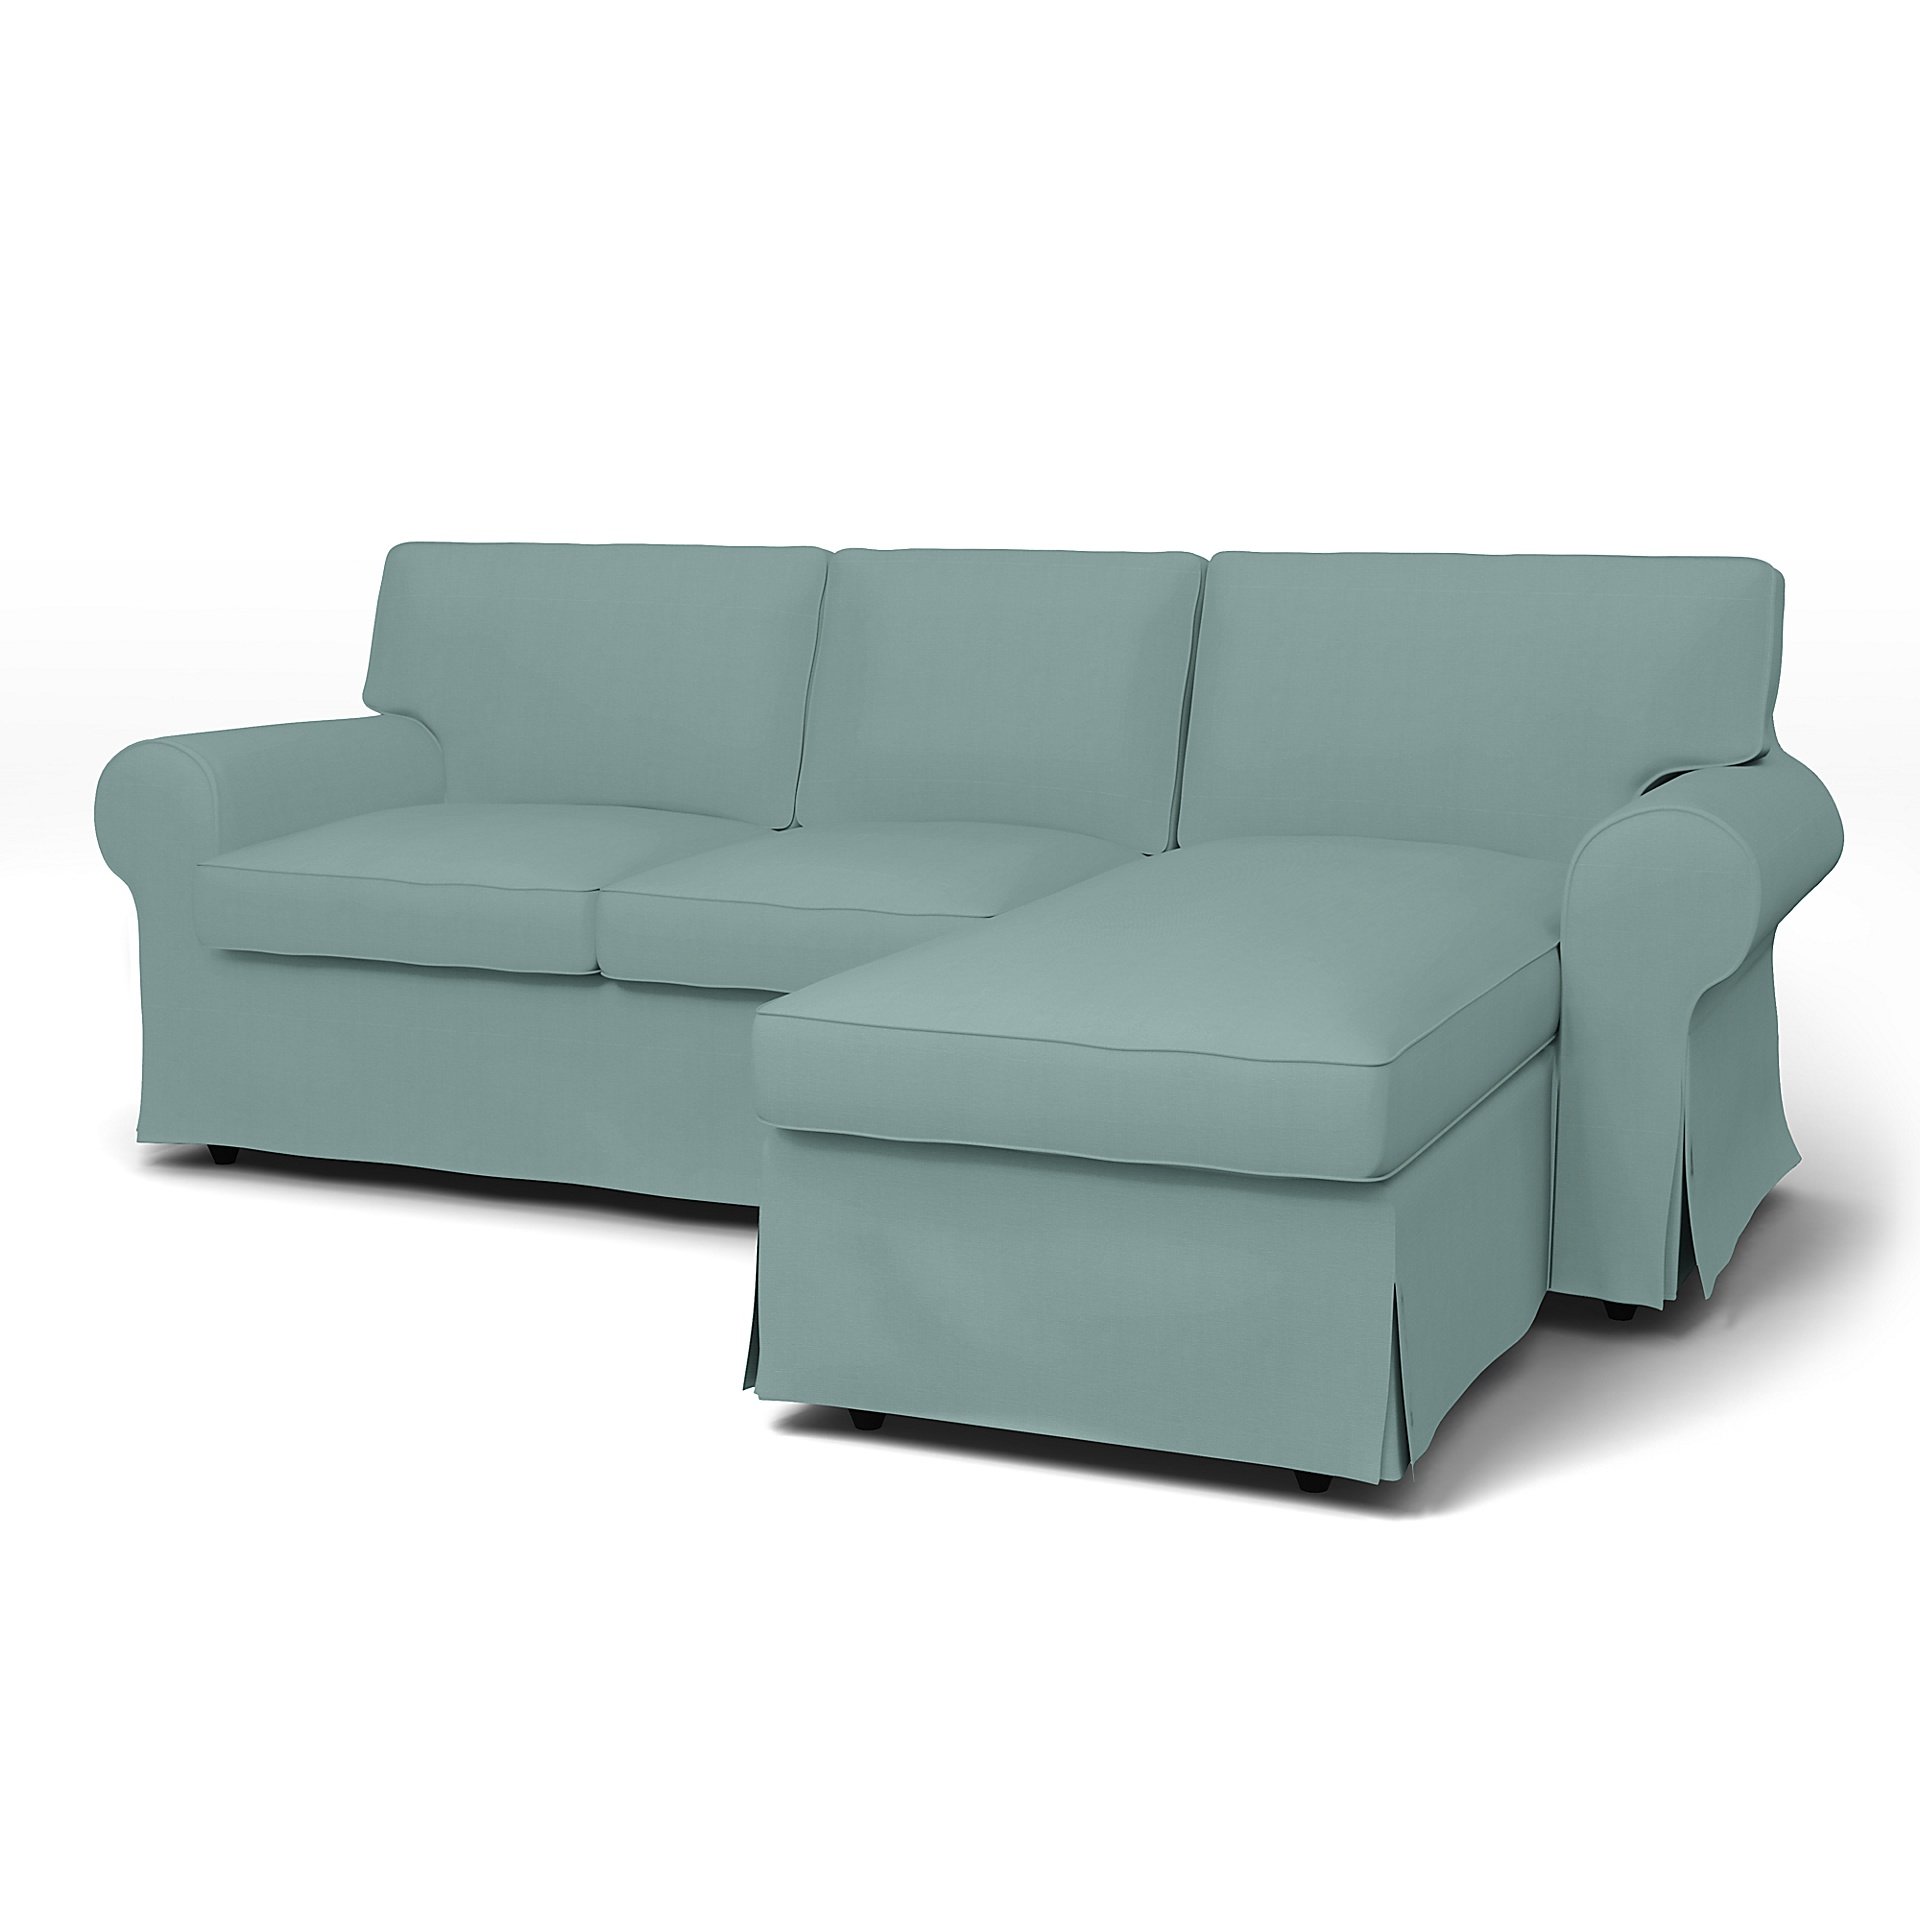 IKEA - Ektorp 3 Seater Sofa with Chaise Cover, Mineral Blue, Cotton - Bemz